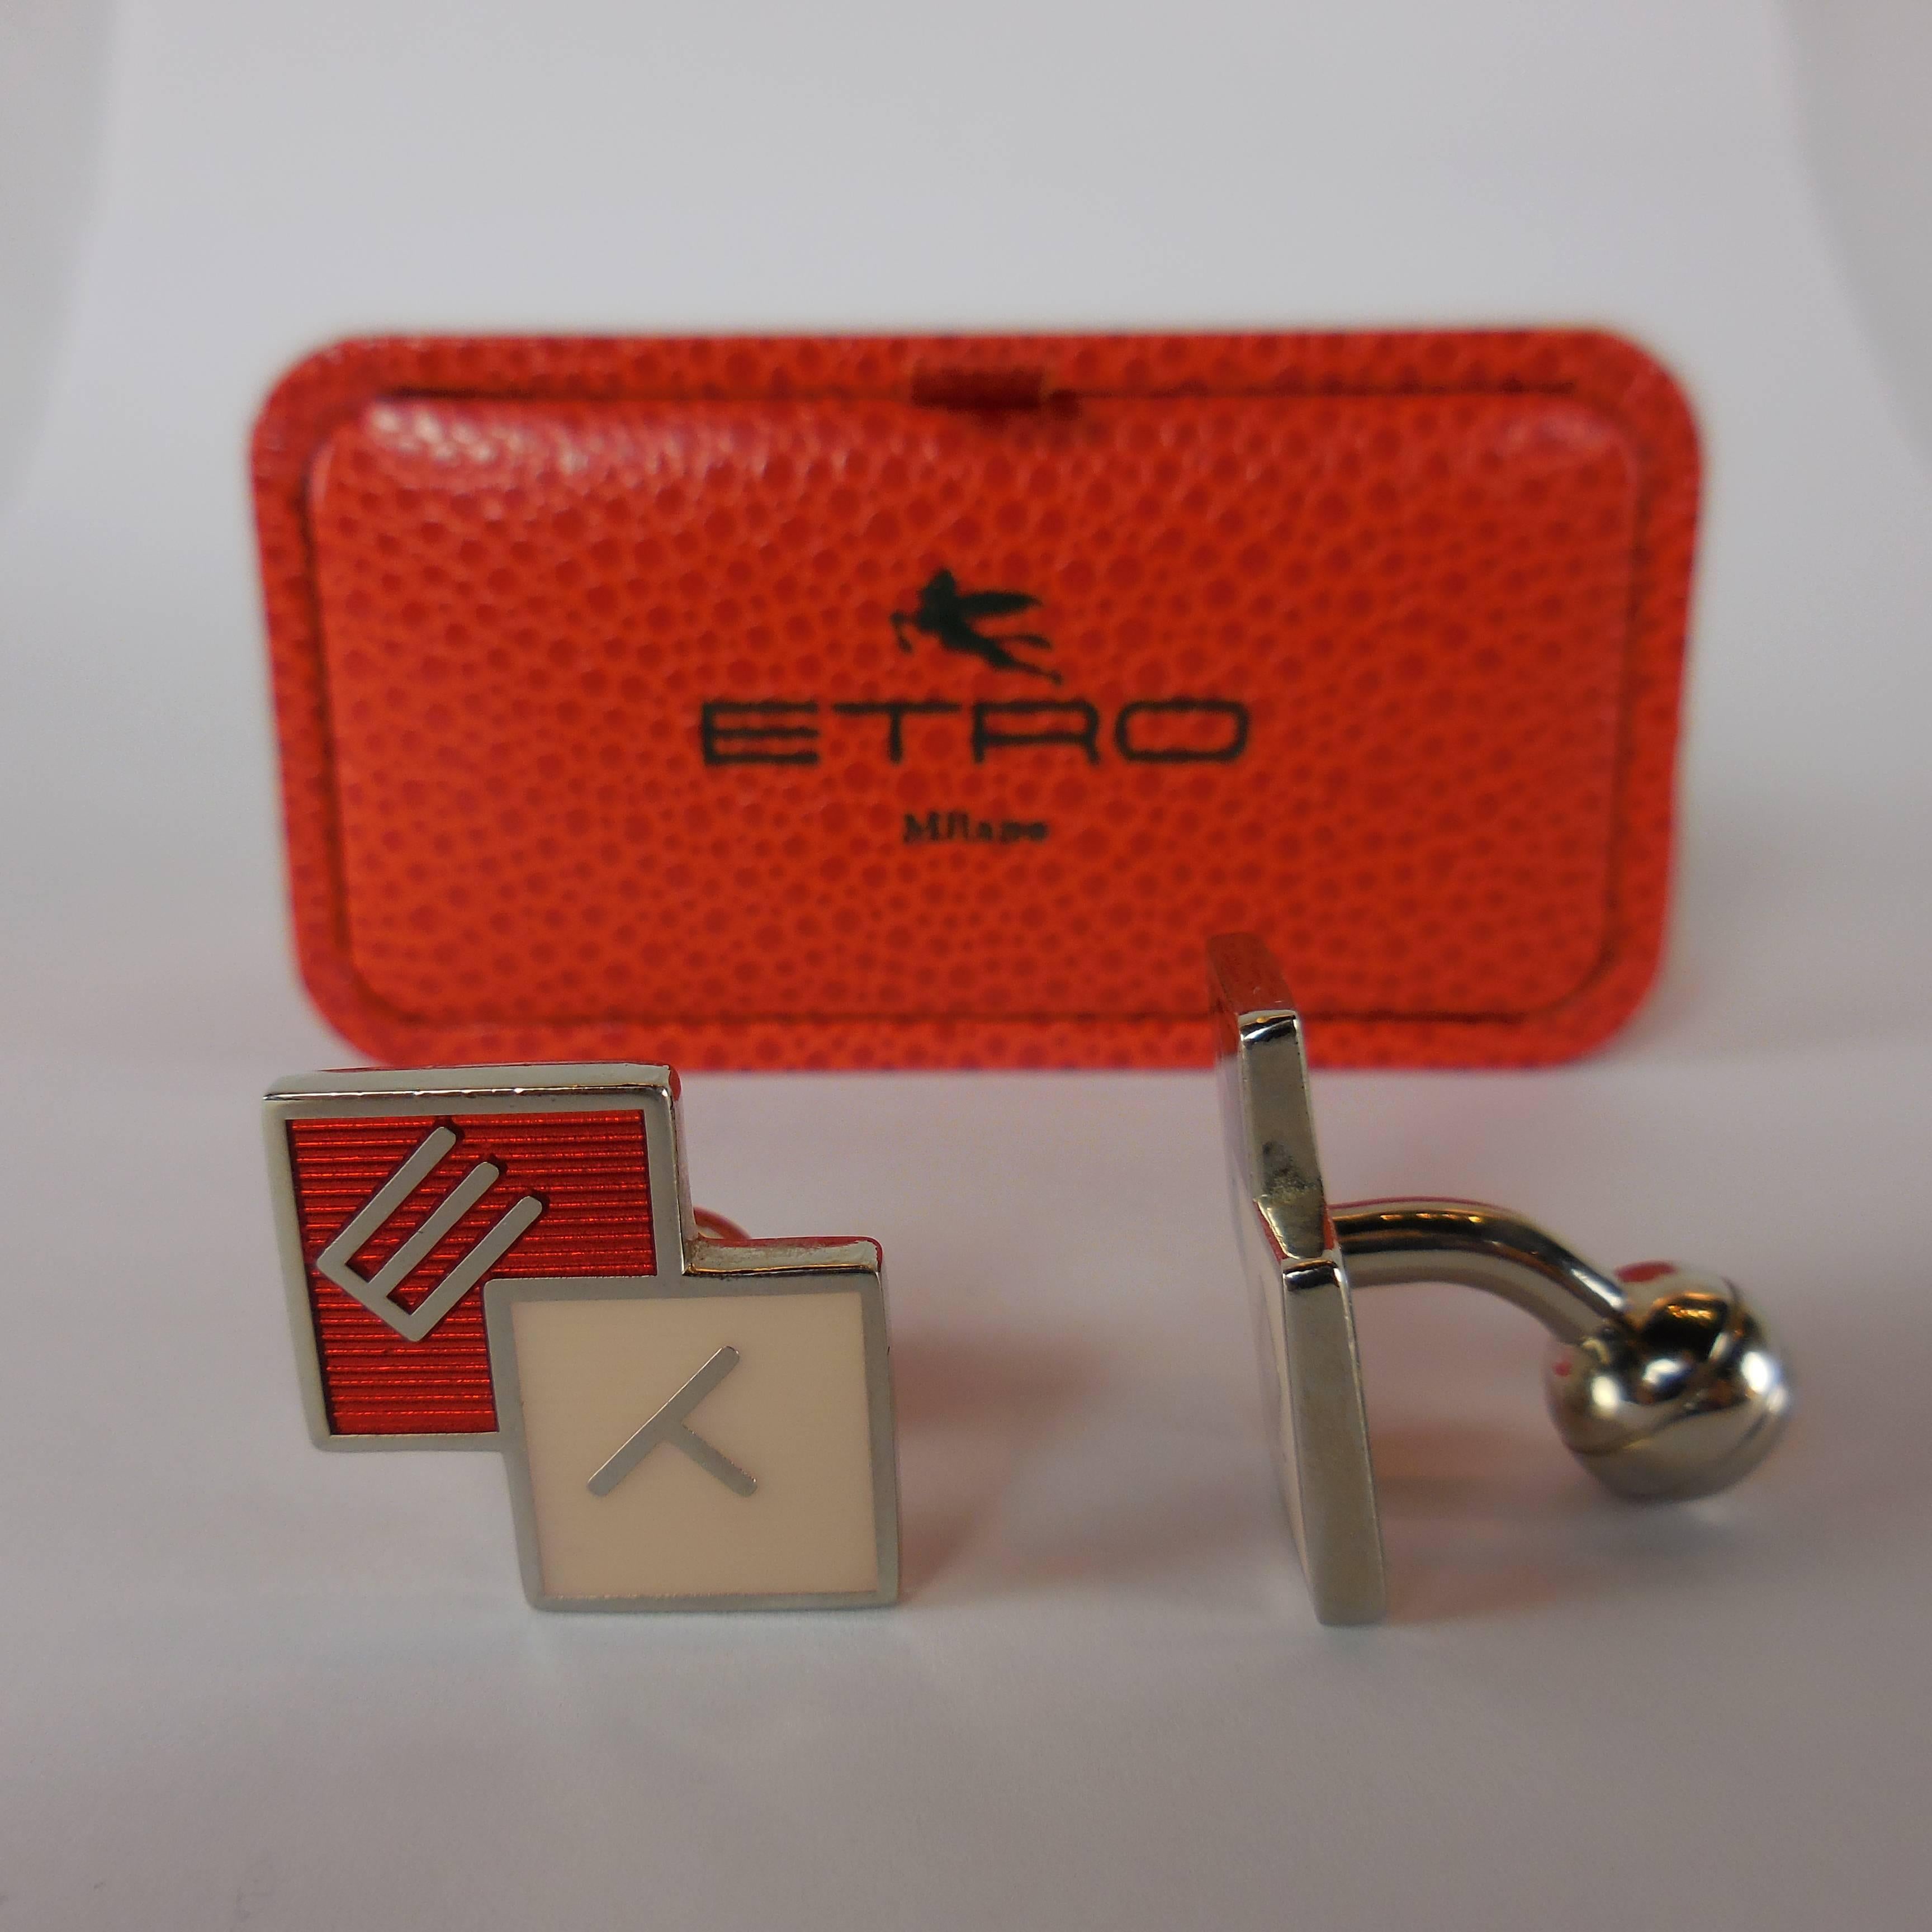 Pair of signature ETRO Milano red, black, and ivory enameled and gold color  cufflinks with ball fasteners each embossed with E.
Signature presentation box included.